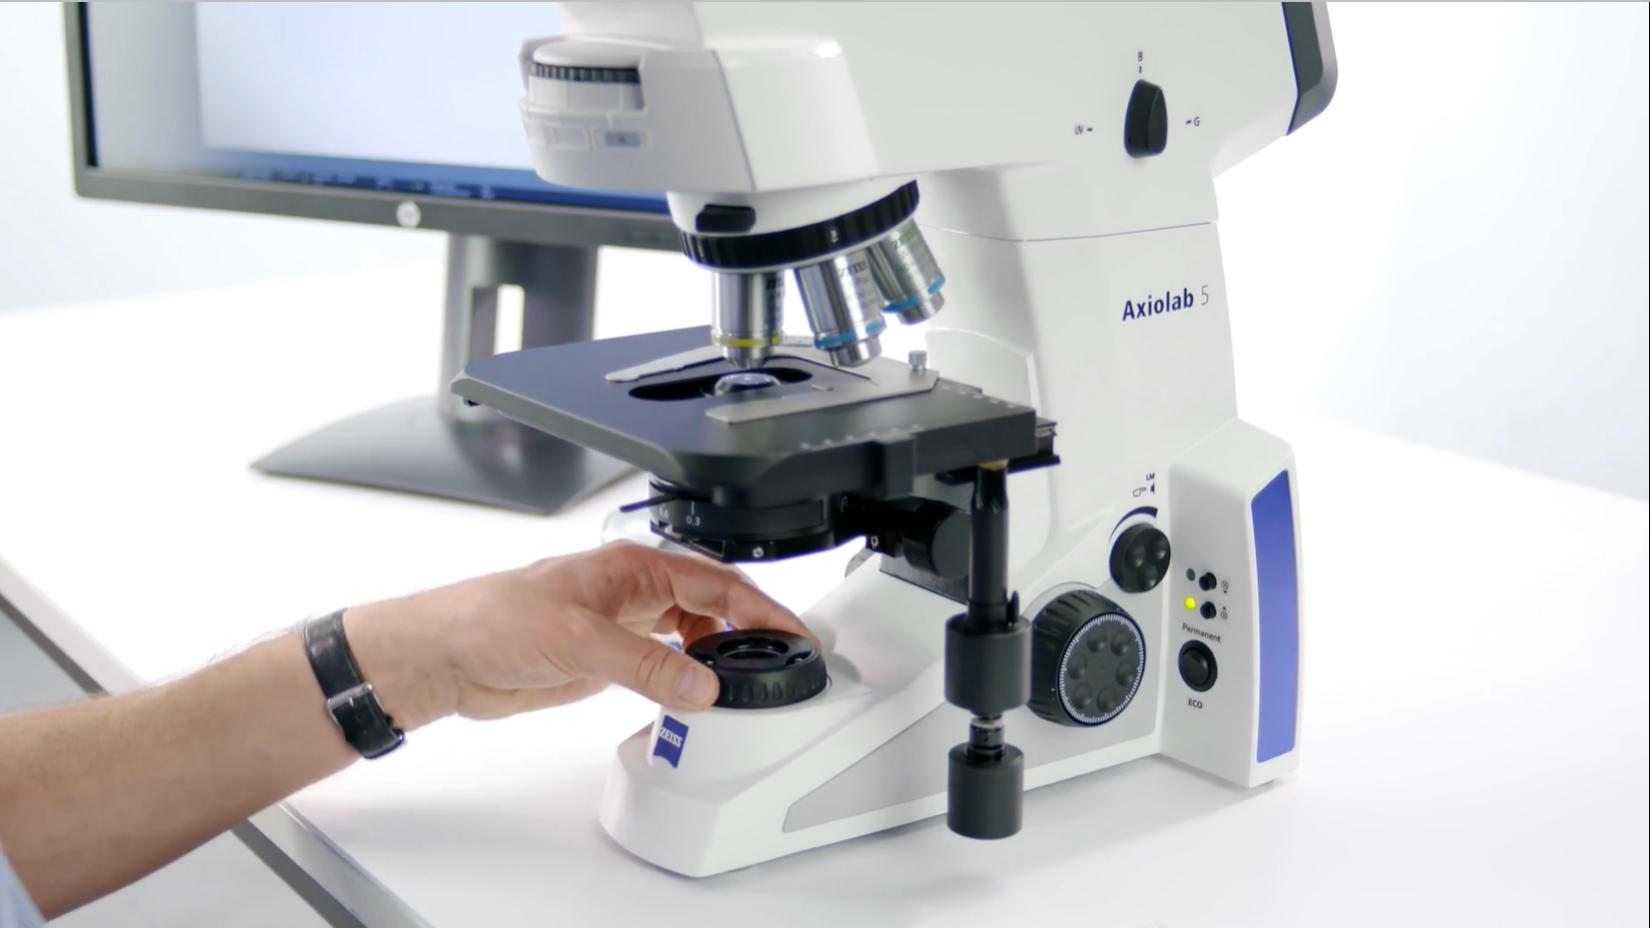 Image of a ZEISS Axiolab 5 microscope on a white table with a male person's arm in the foreground adjusting the field stop diaphragm. A screen can be seen in the background.